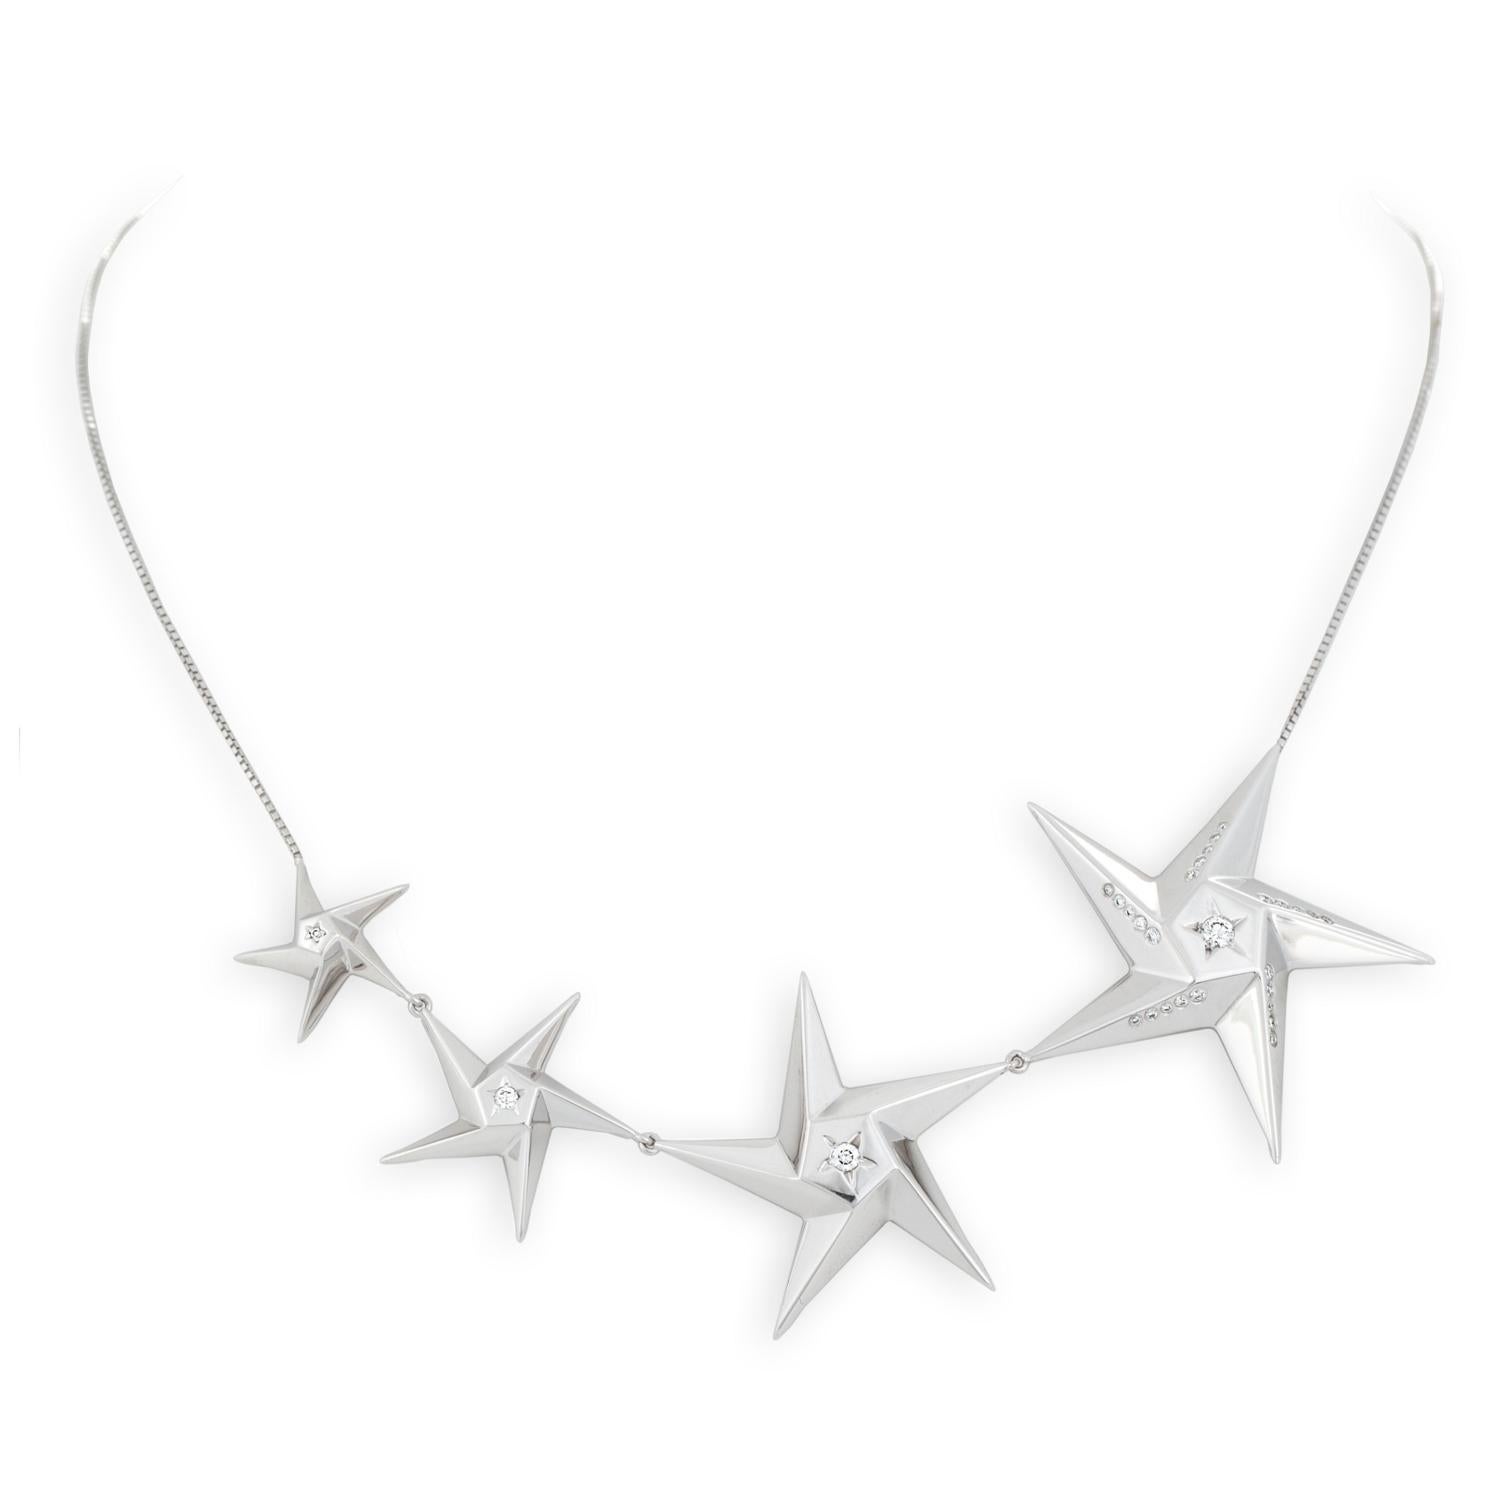 Daou  Diamond Star Necklace in White Gold a collar choker style necklace  For Sale 2